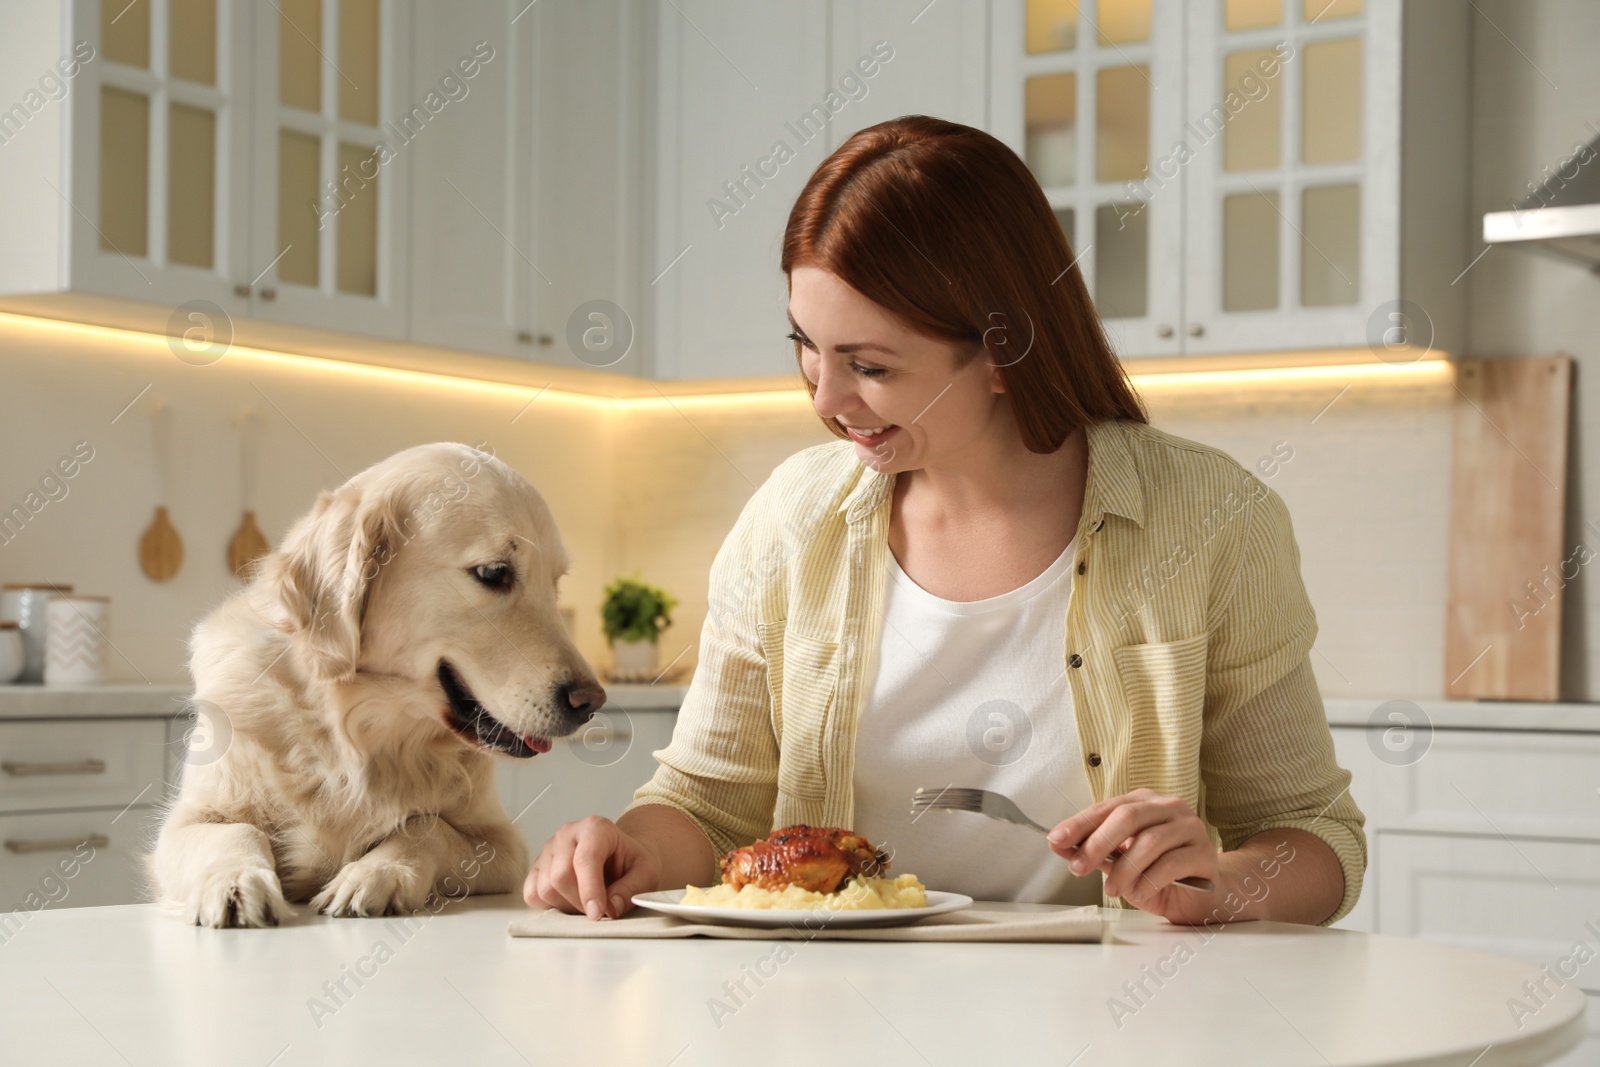 Photo of Cute dog begging for food while owner eating at table